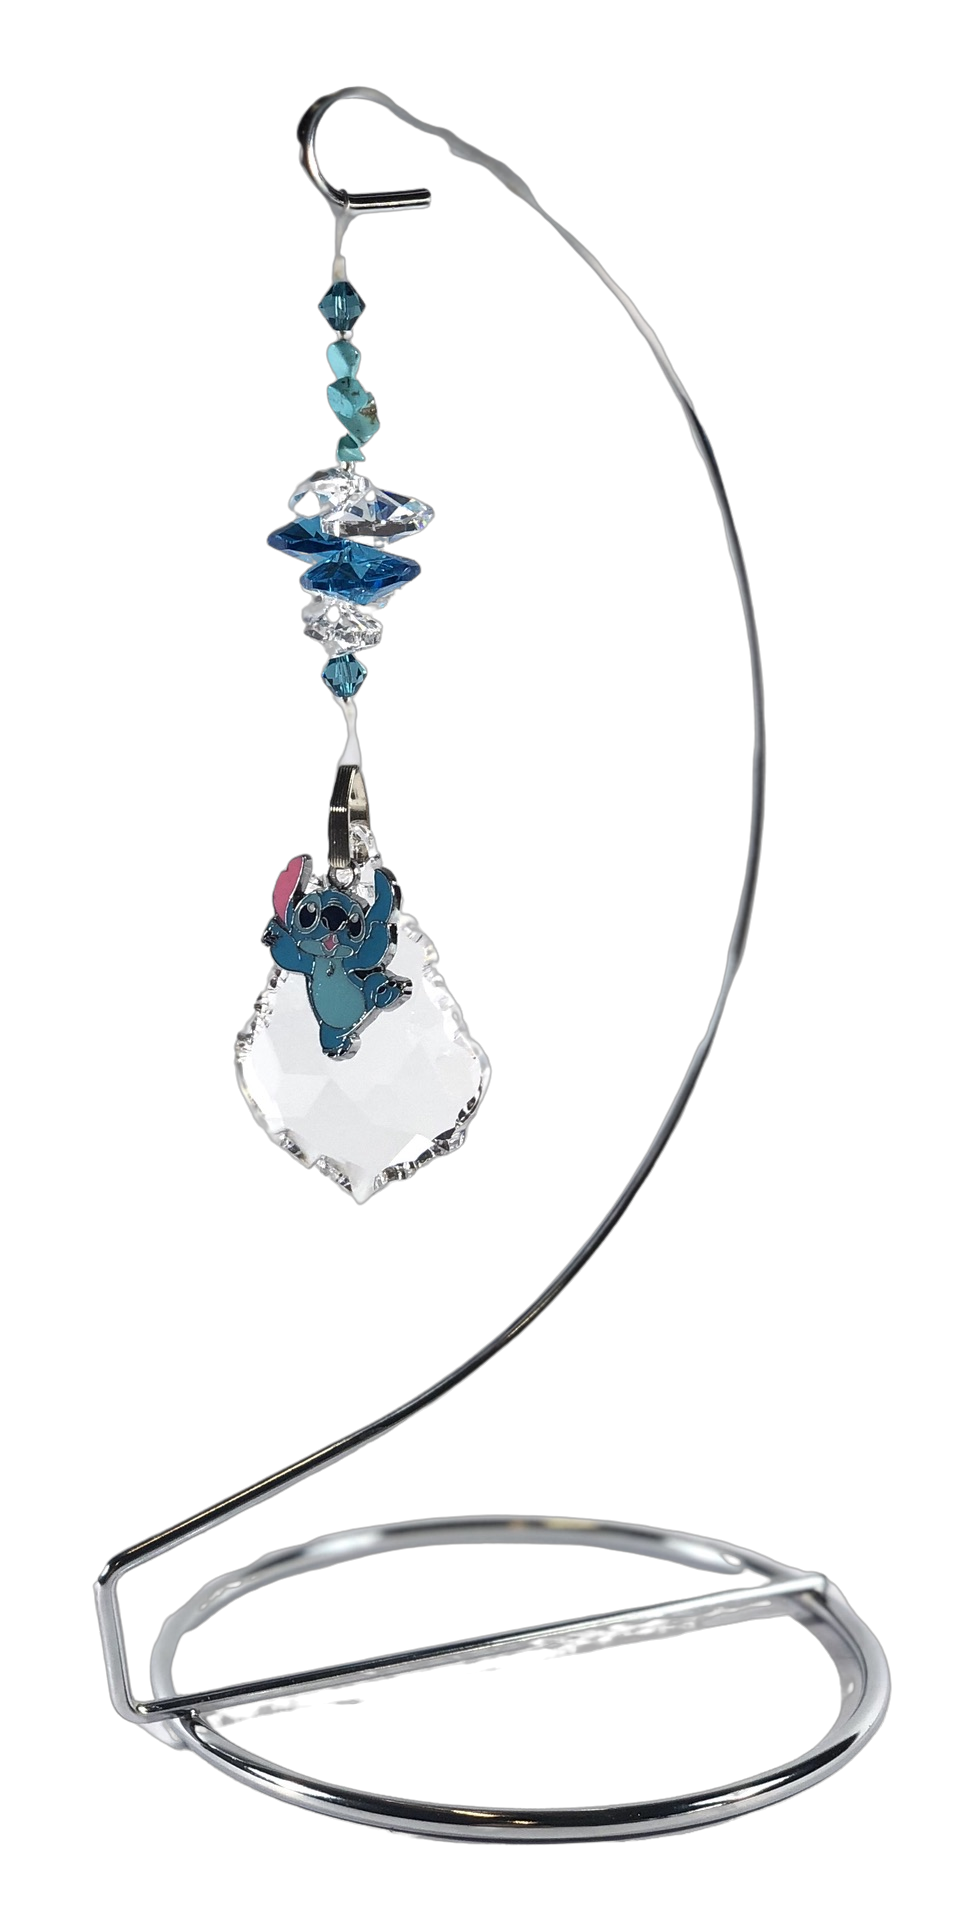 Lilo & Stitch - Stitch crystal suncatcher is decorated with turquoise gemstones and come on this amazing stand.